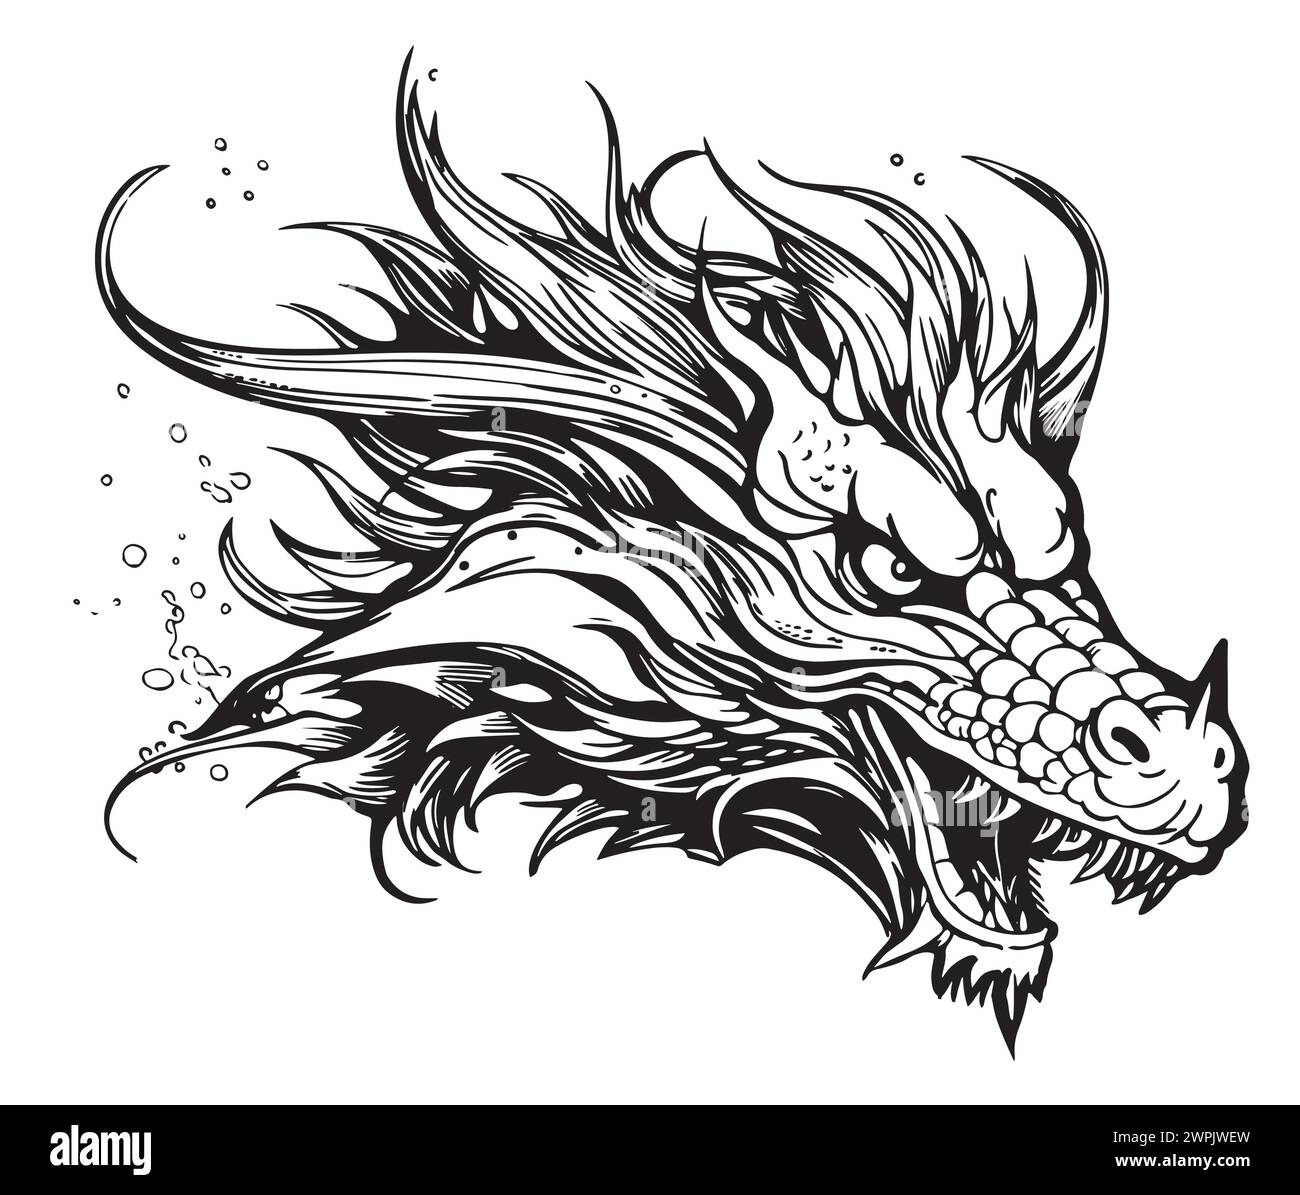 Hand Drawn Engraving Pen and Ink Dragon Head Vintage Vector Illustration Stock Vector